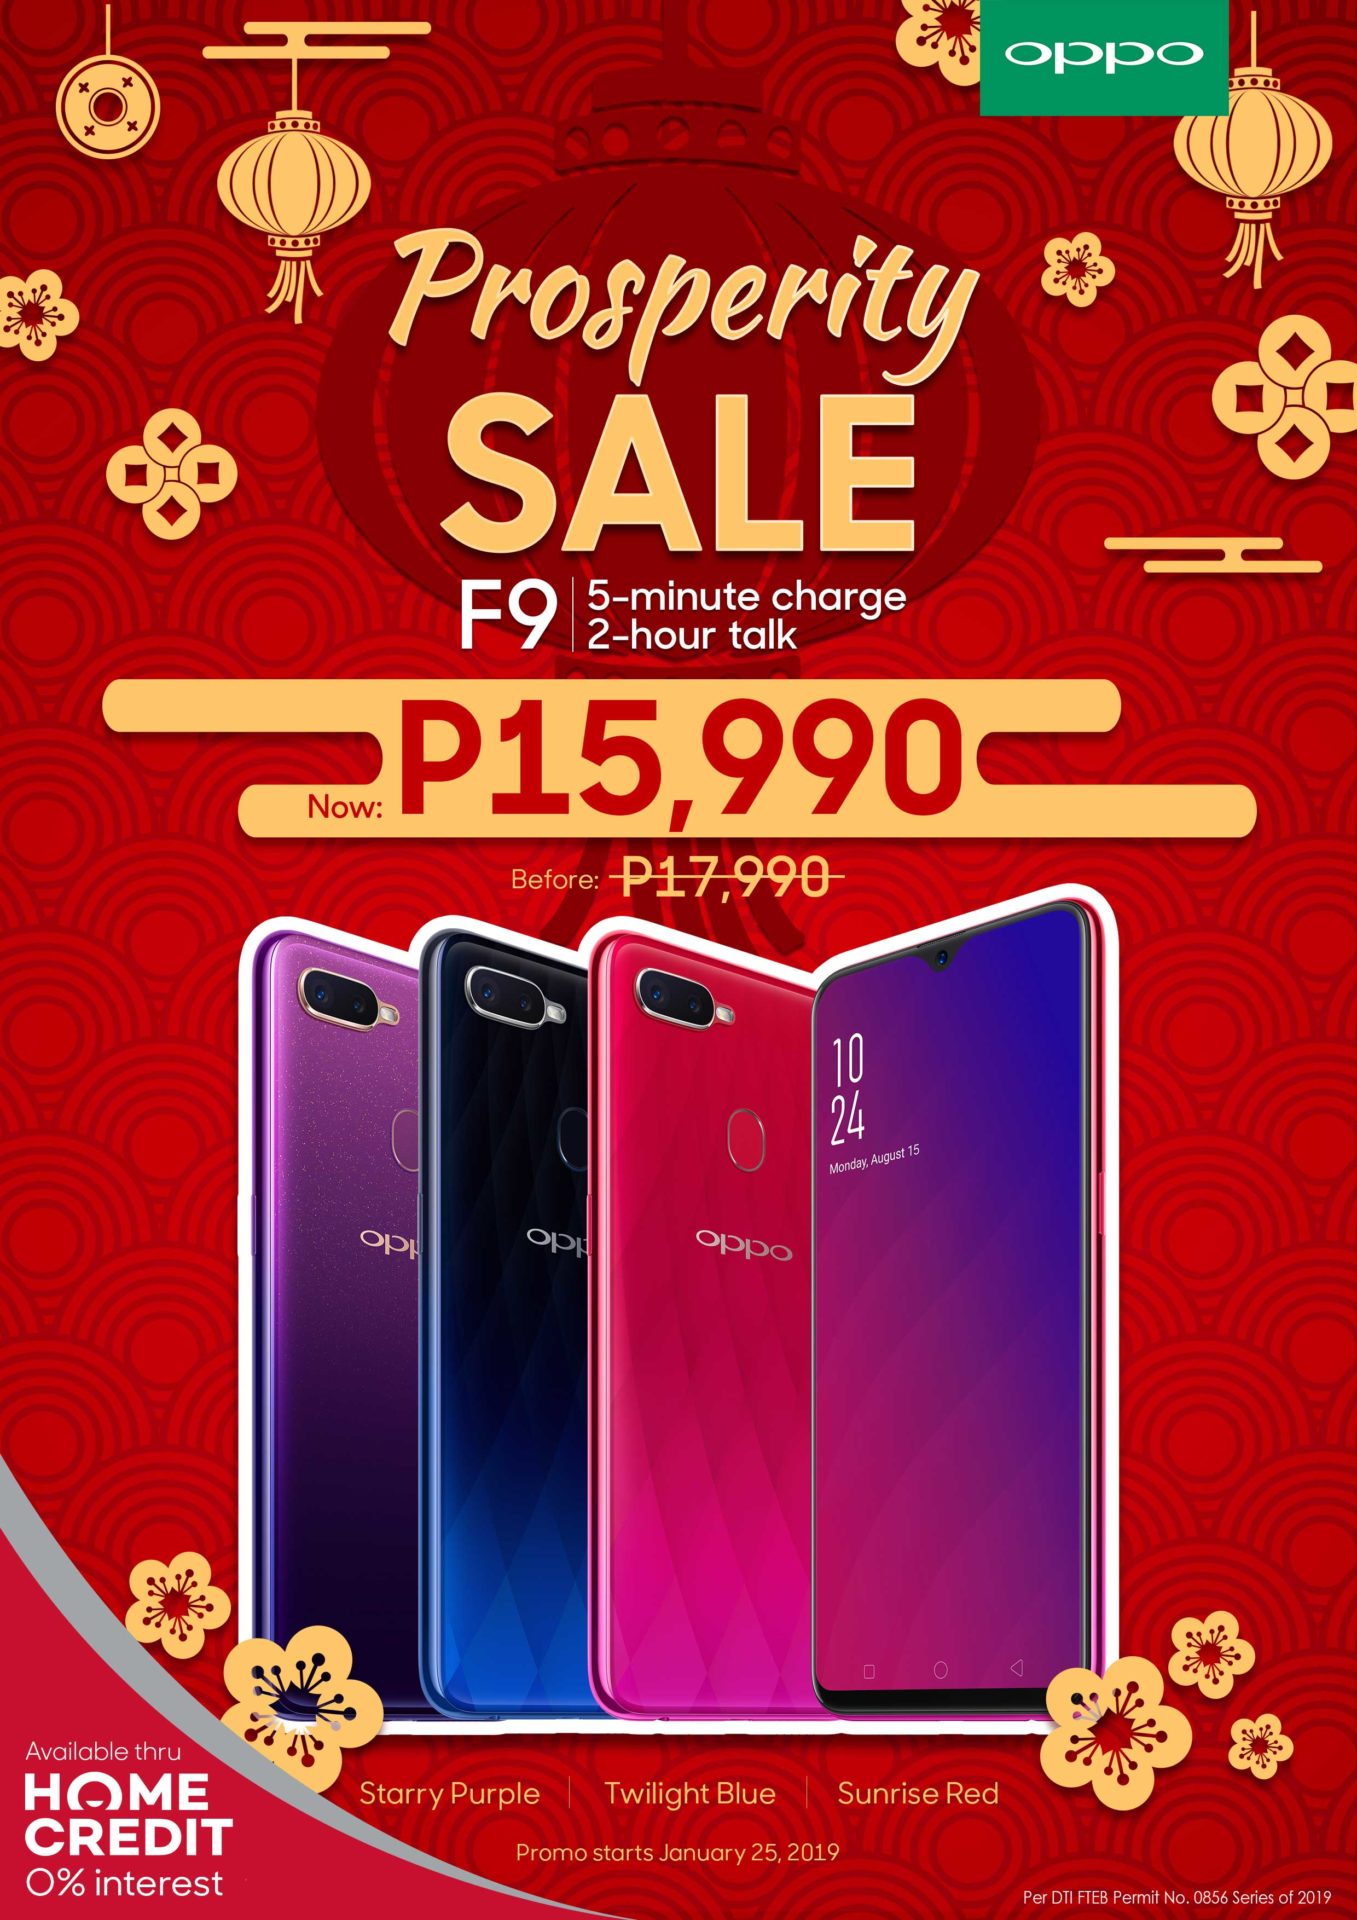 The OPPO F9 will be Priced at PhP15,990 Starting January 25!